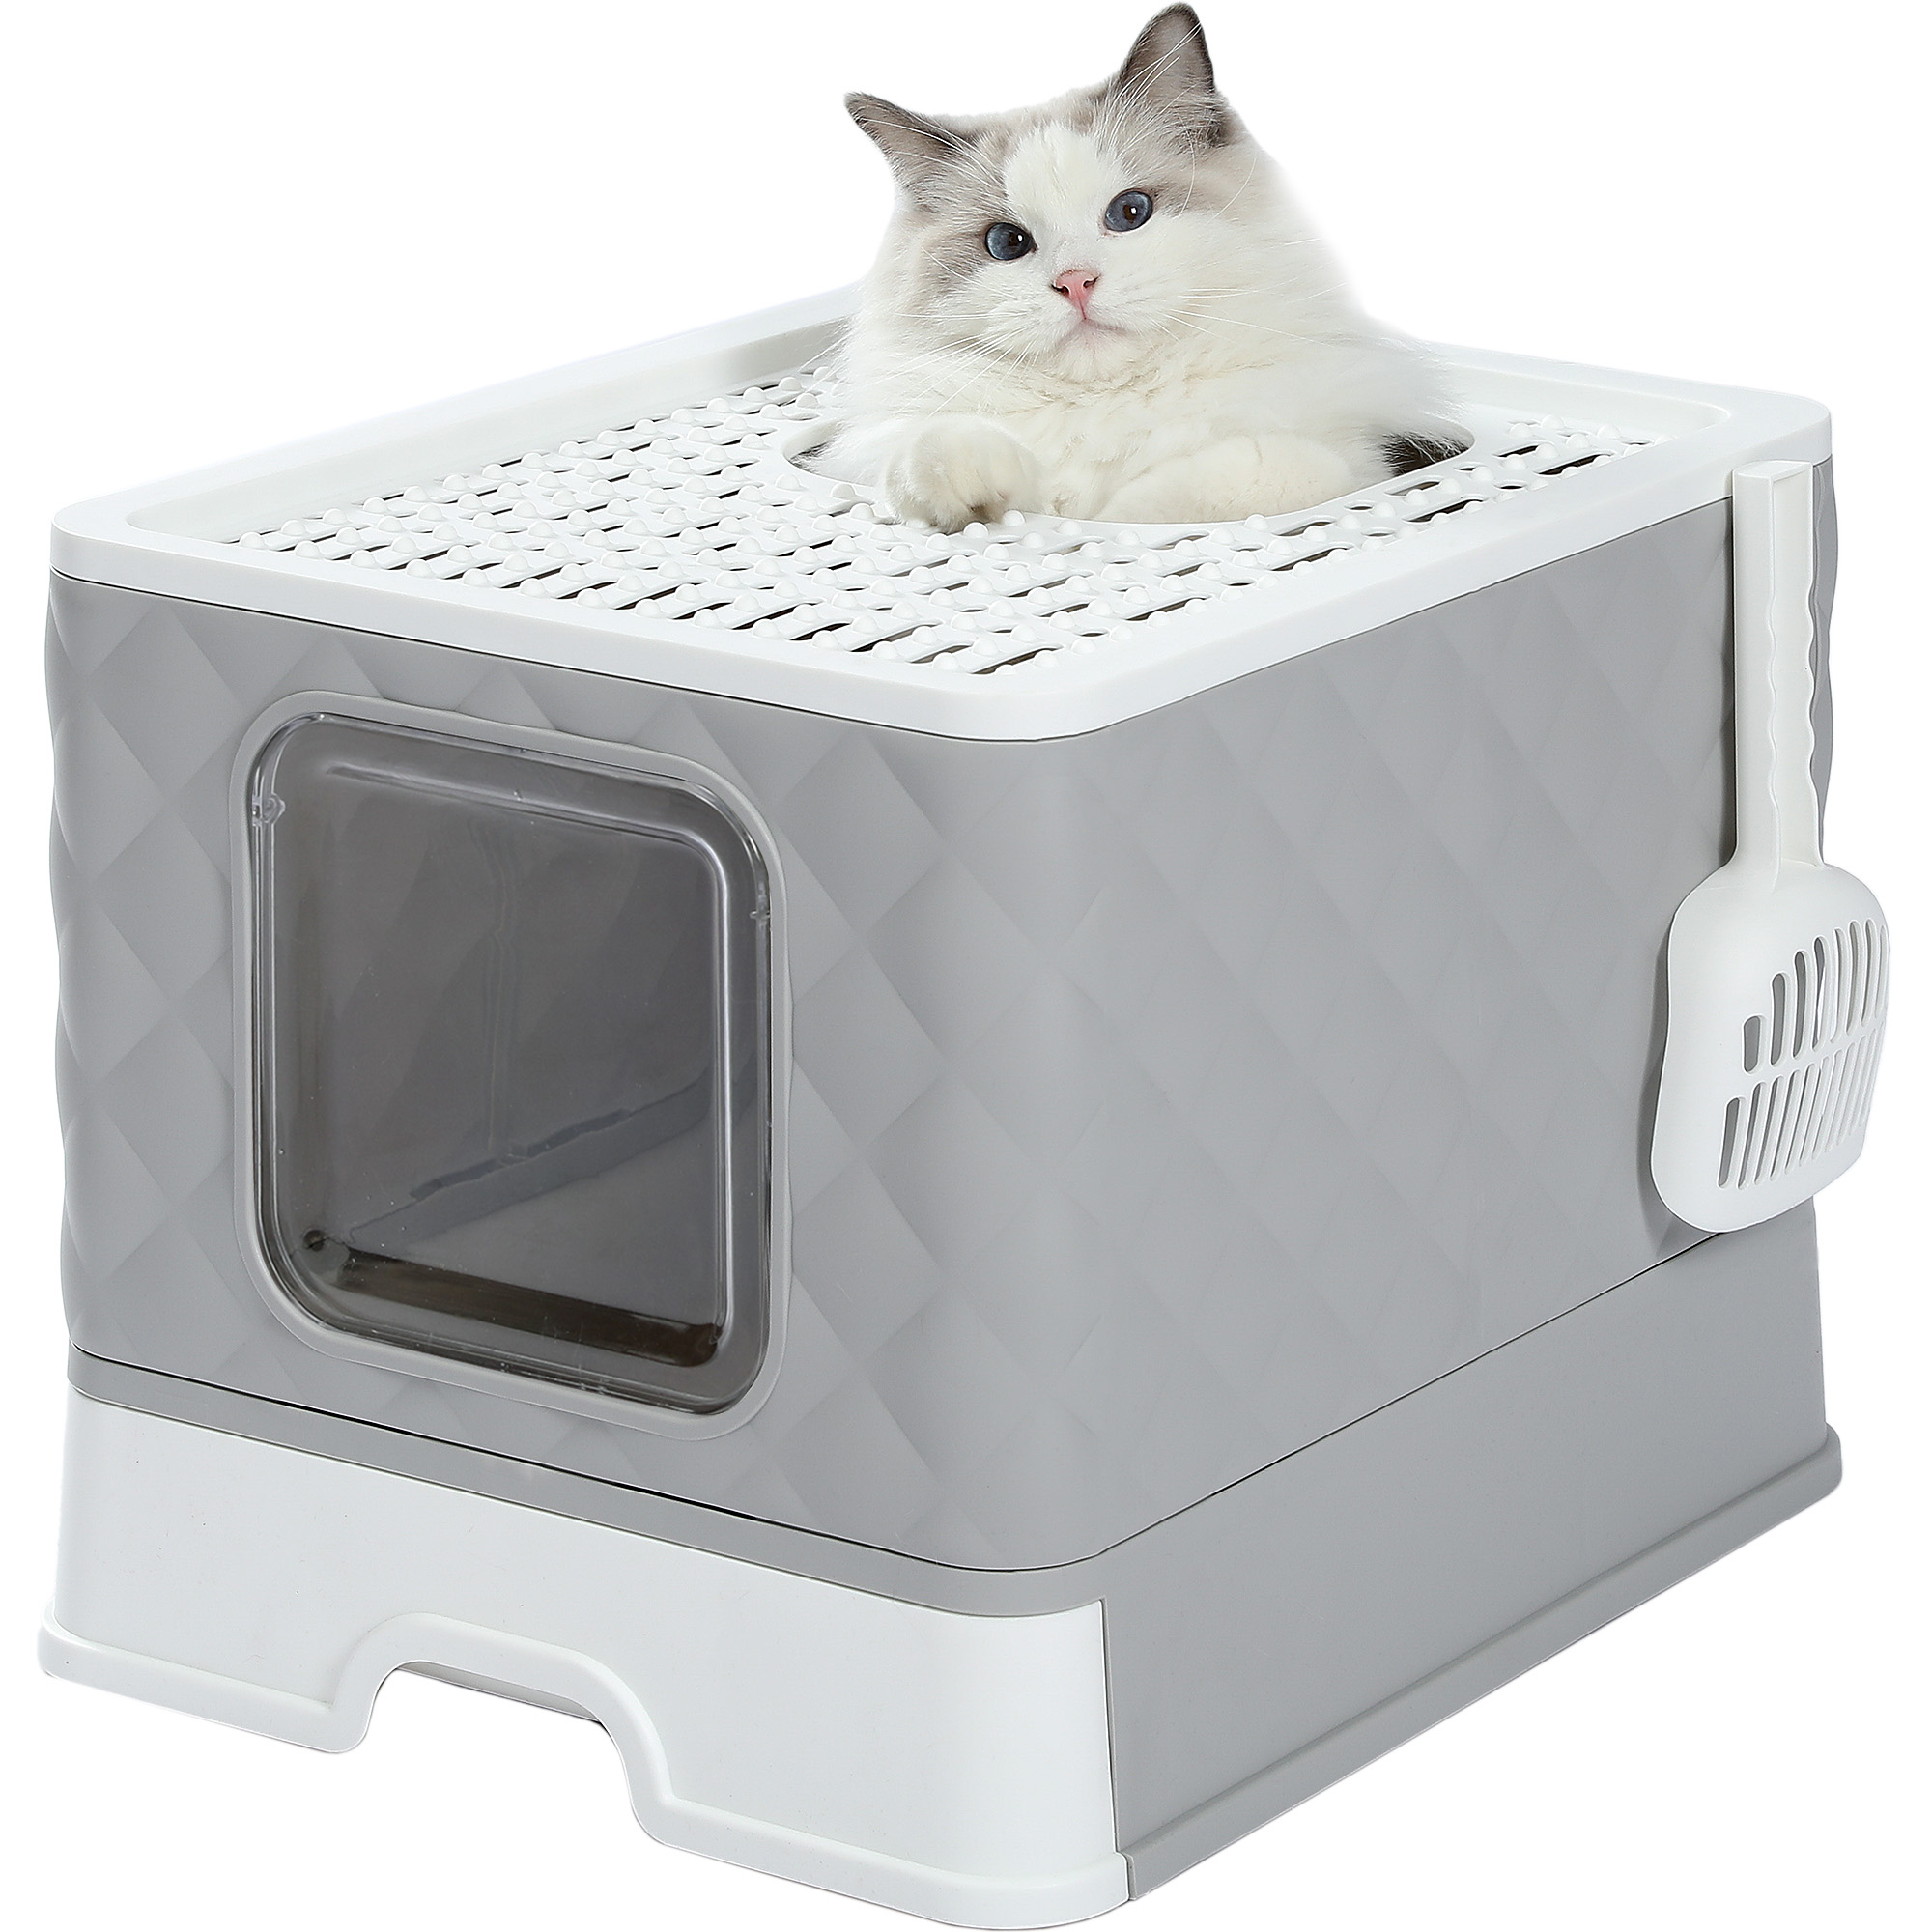 PAWZ Road Enclosed Cat Litter Box Large with Lid Drawer Type Easy to Clean,Gray - image 1 of 13